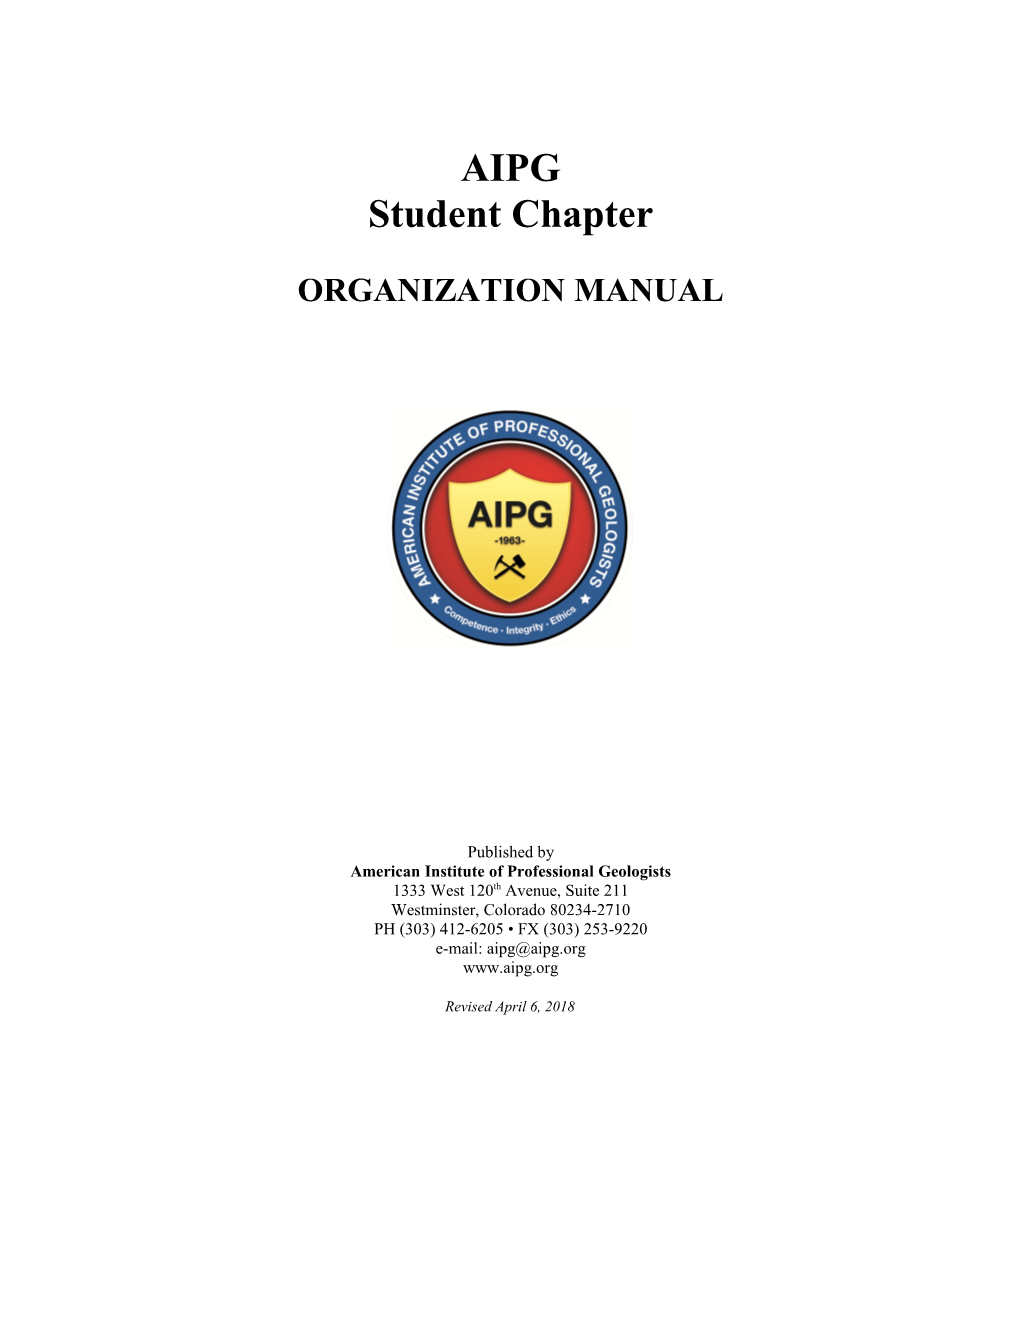 AIPG Student Chapter Organization Manual